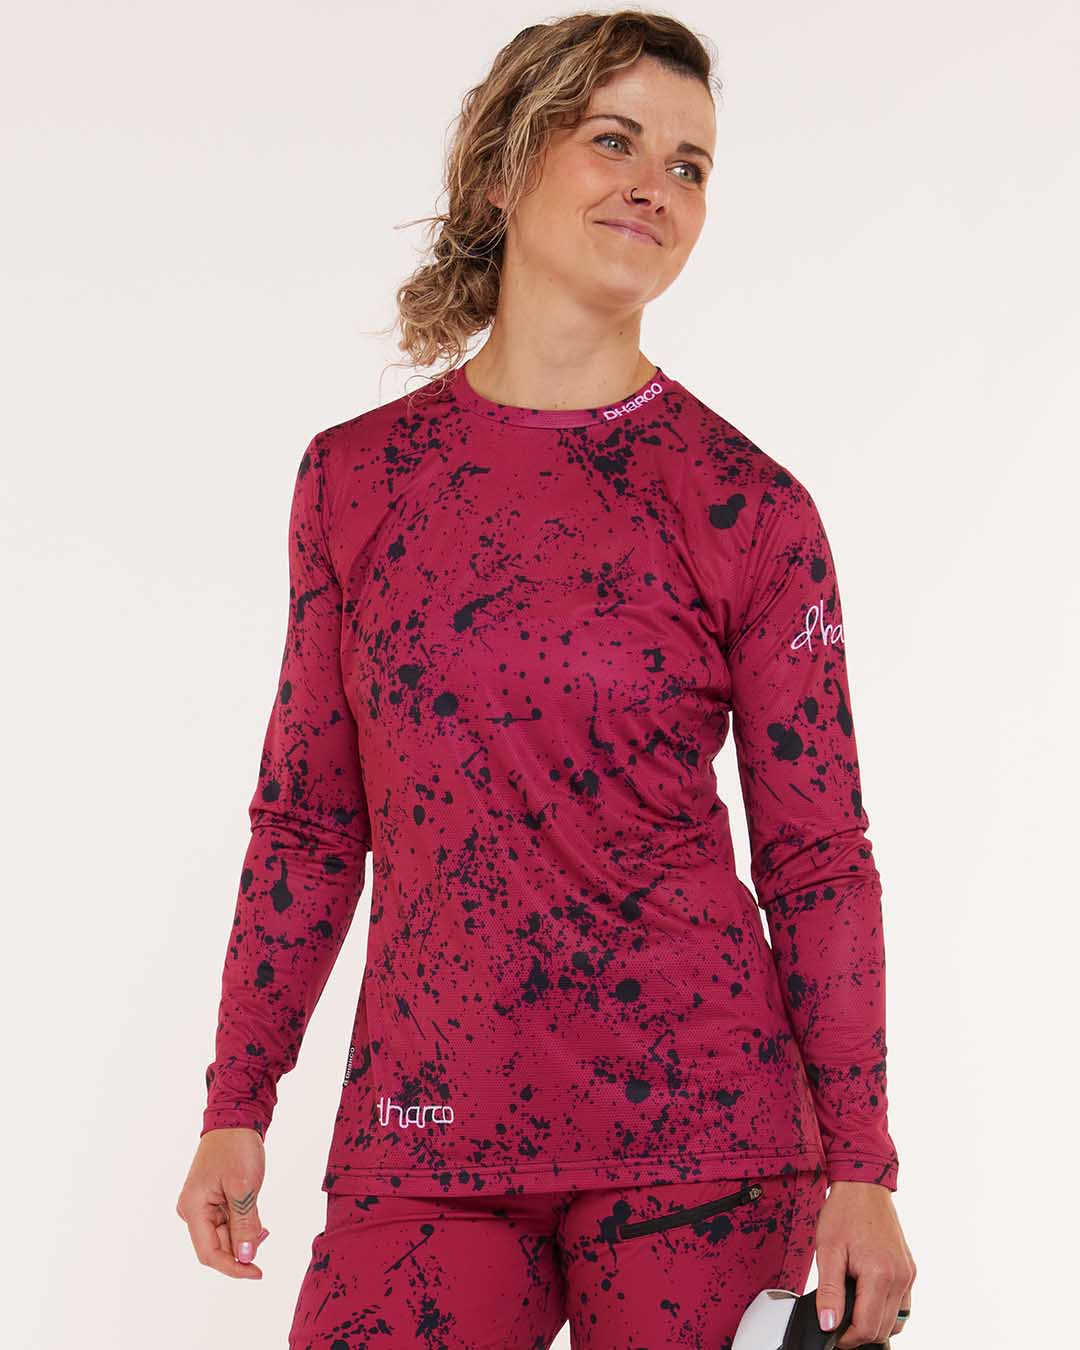 Womens Race Jersey | Chili Peppers